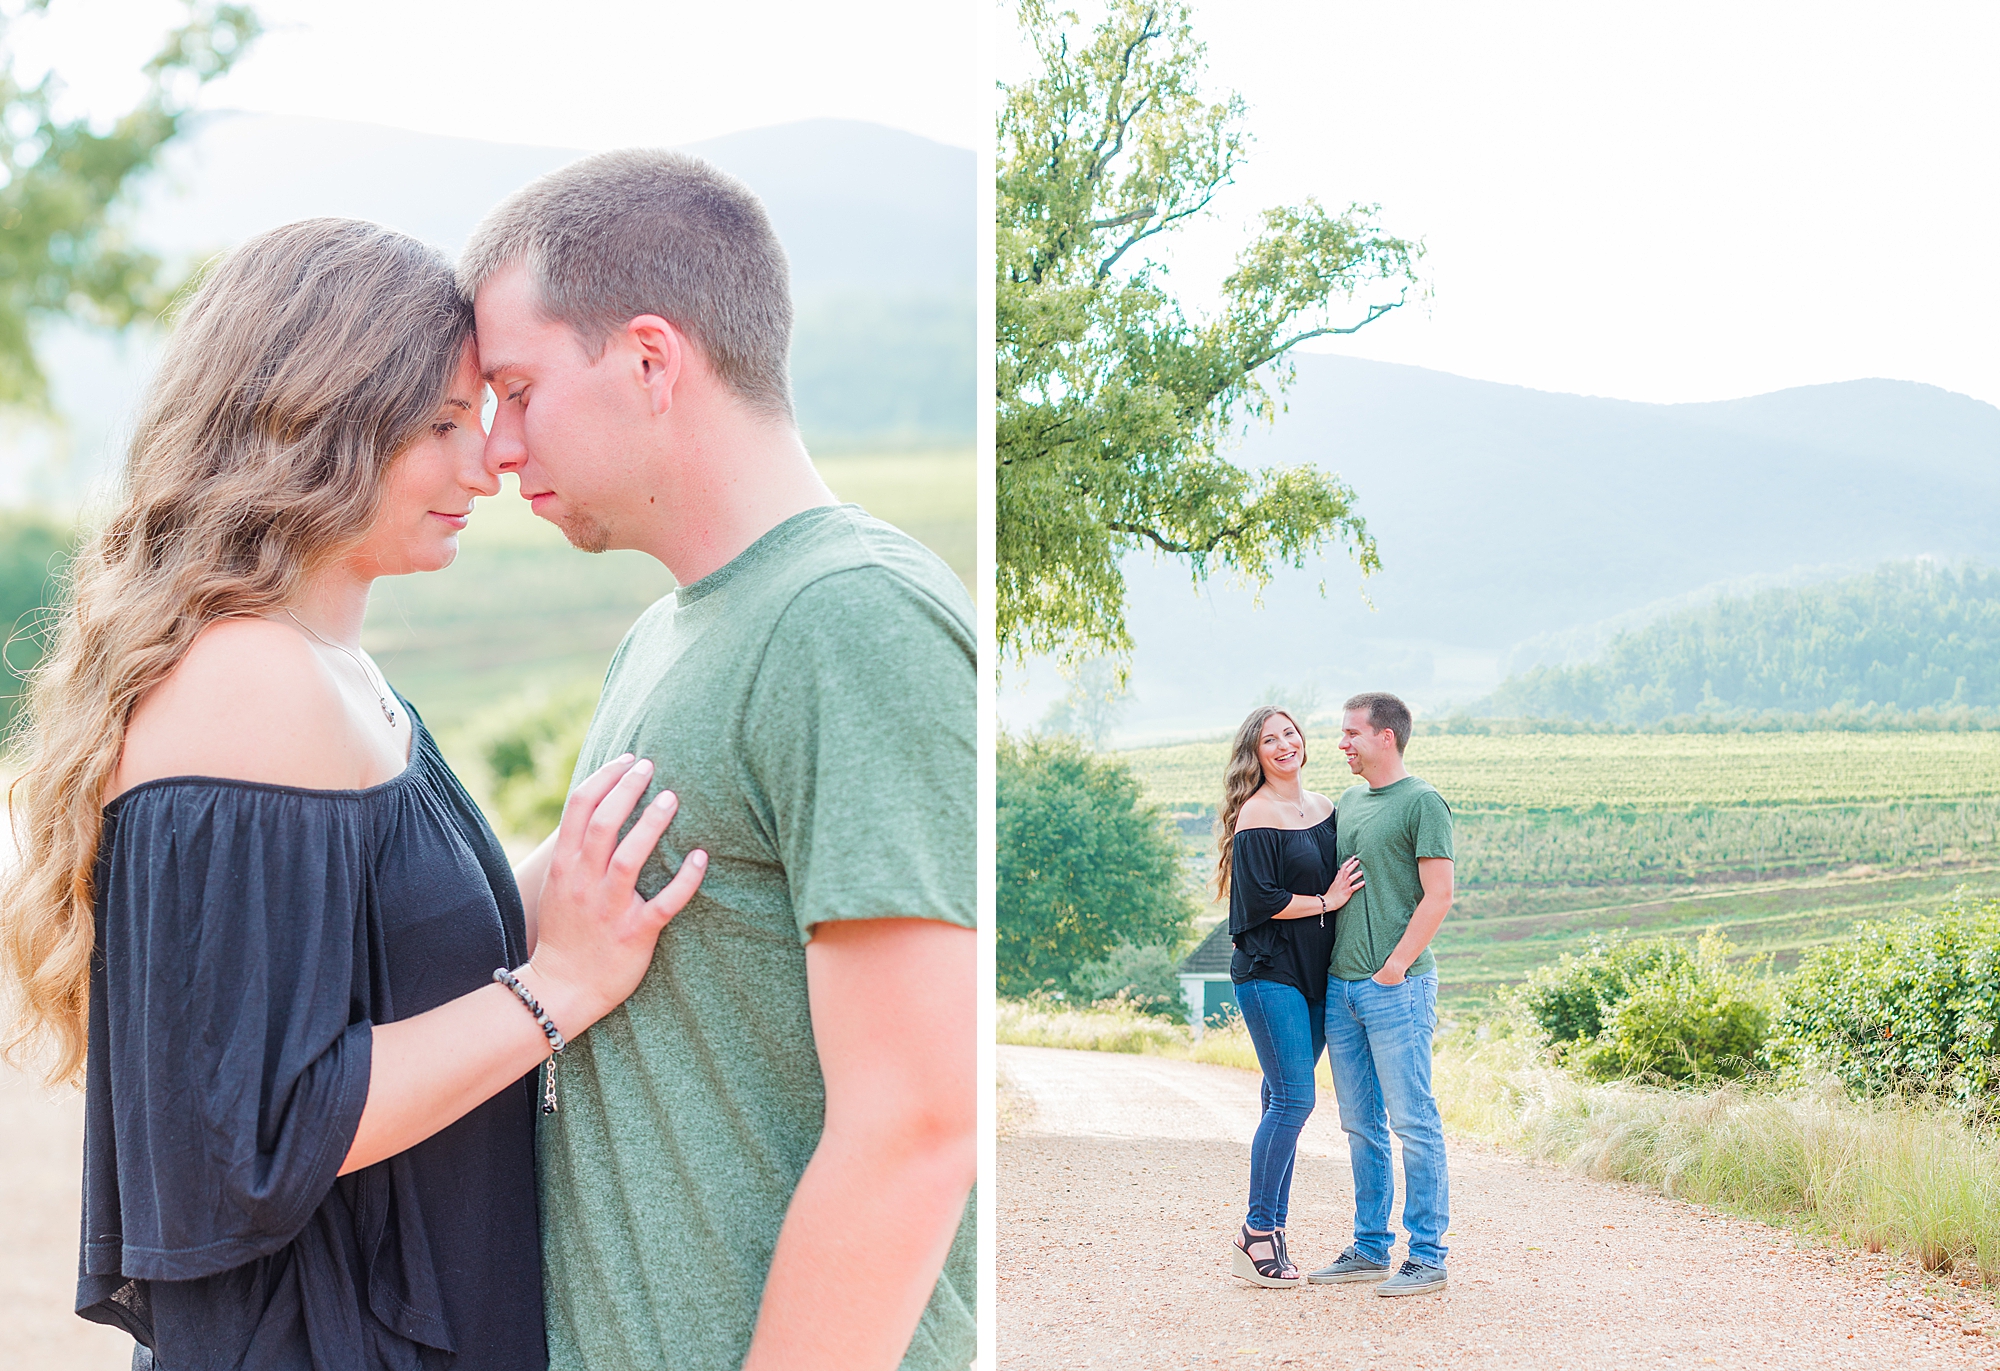 Portraits of couple looking at each other. Virginia Blue Ridge Mountains in the background.